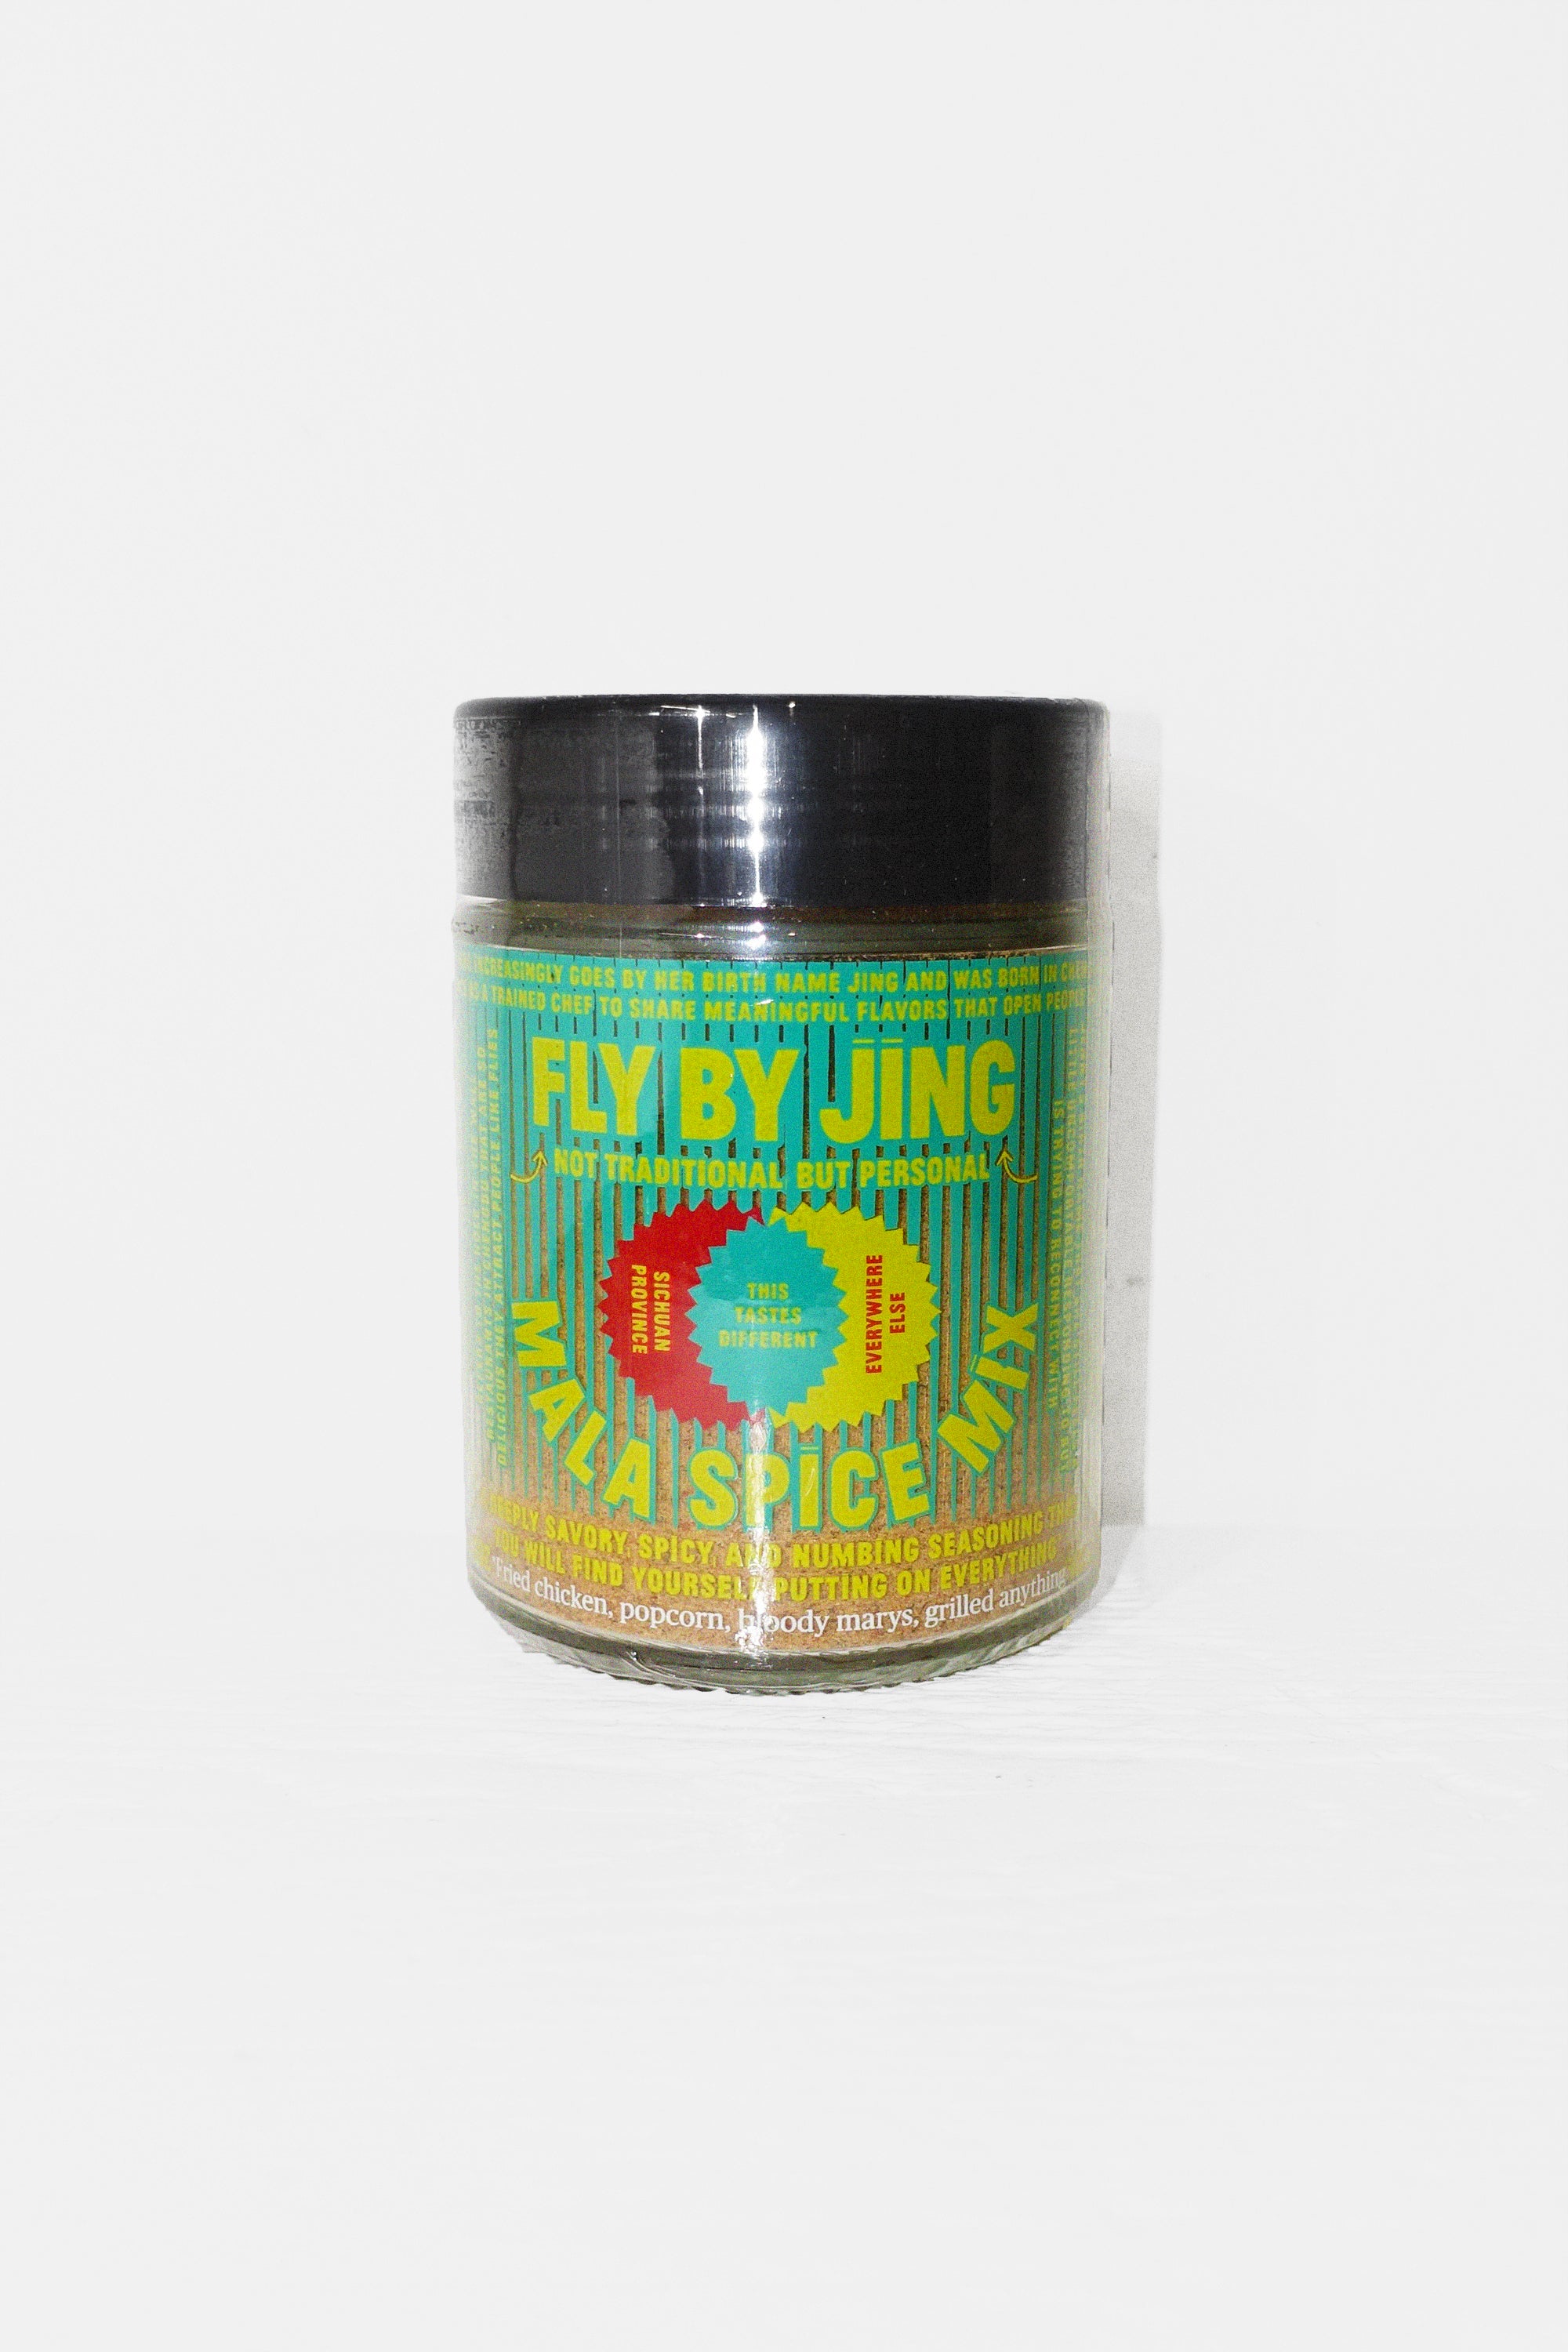 Mala Spice Mix by Fly by Jing